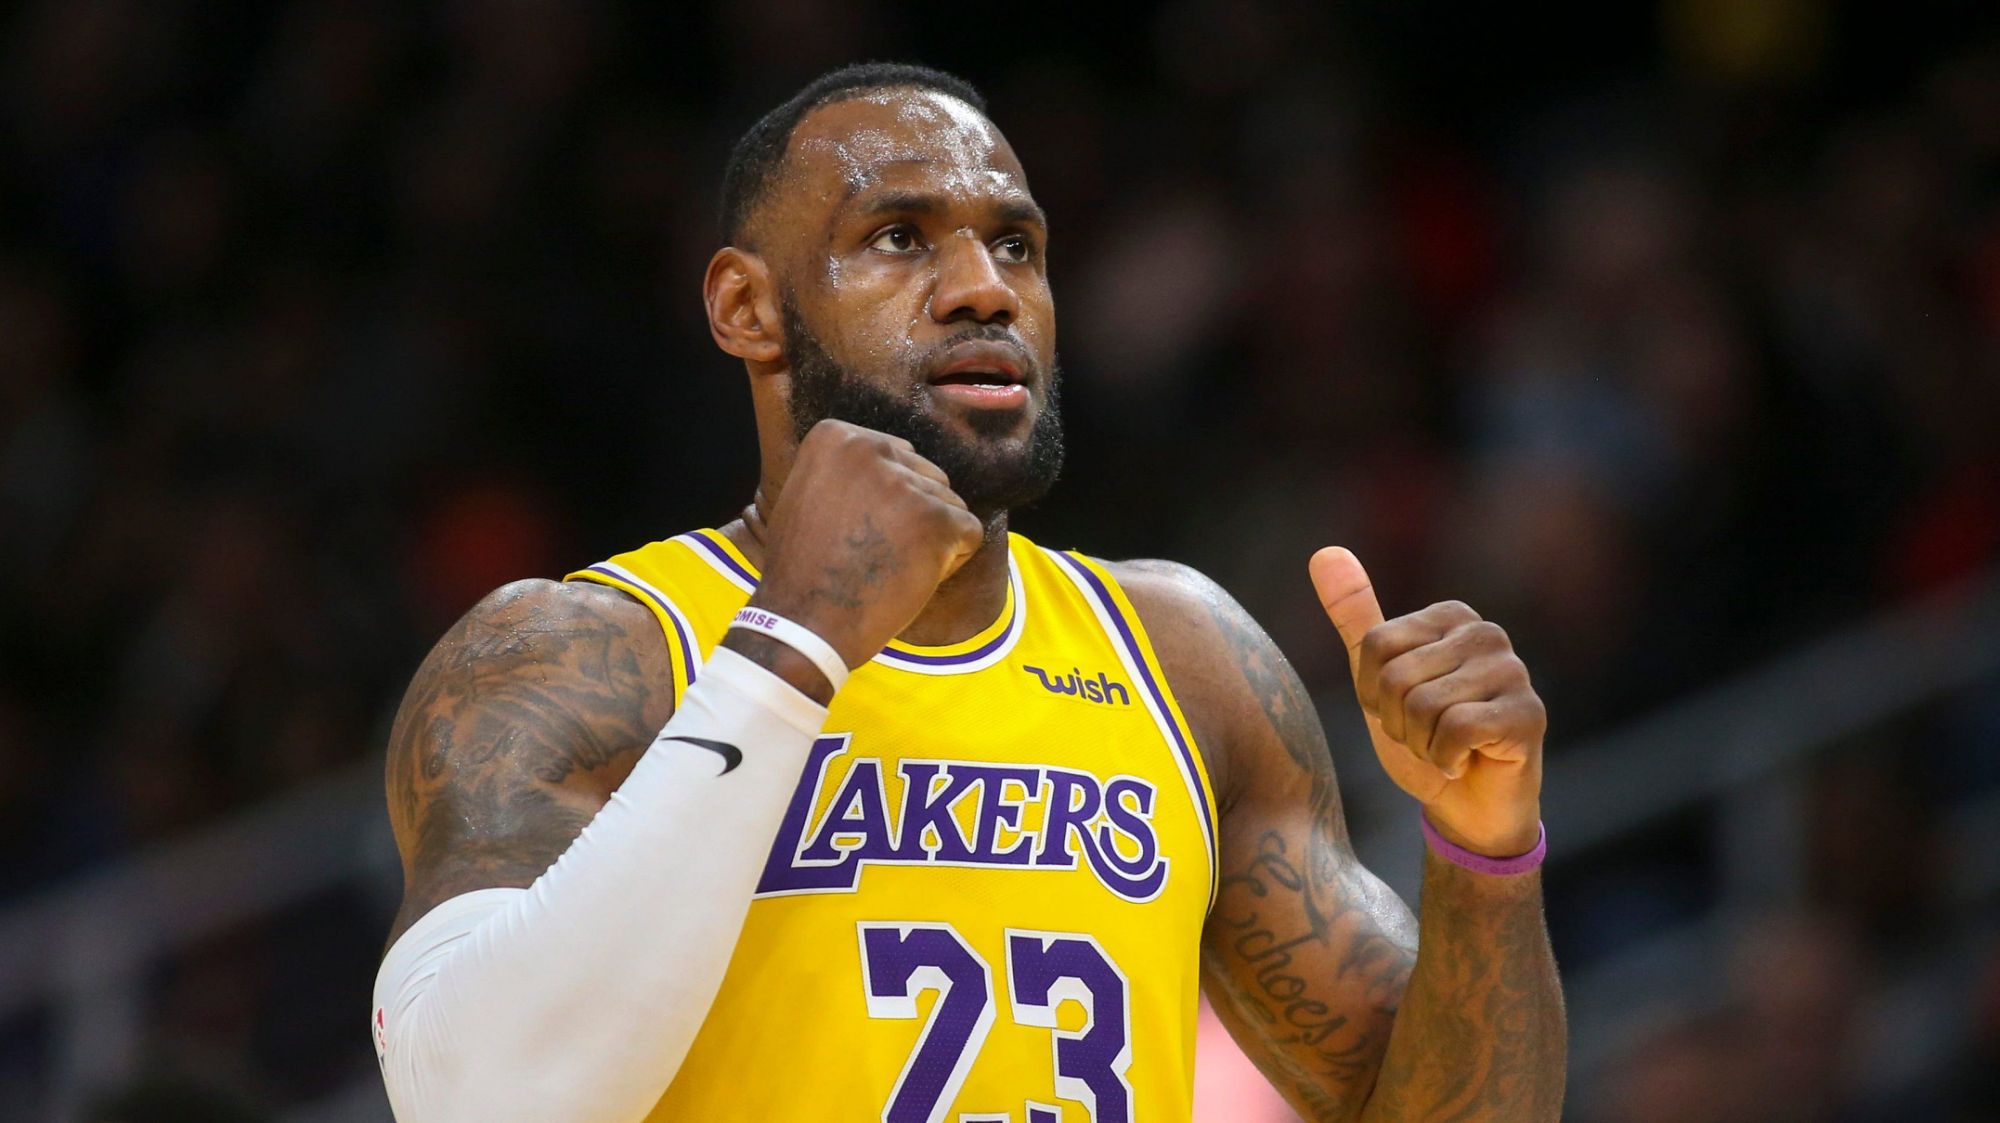 LeBron James hit Brooklyn by forming the Big 3 after James Harden’s possession